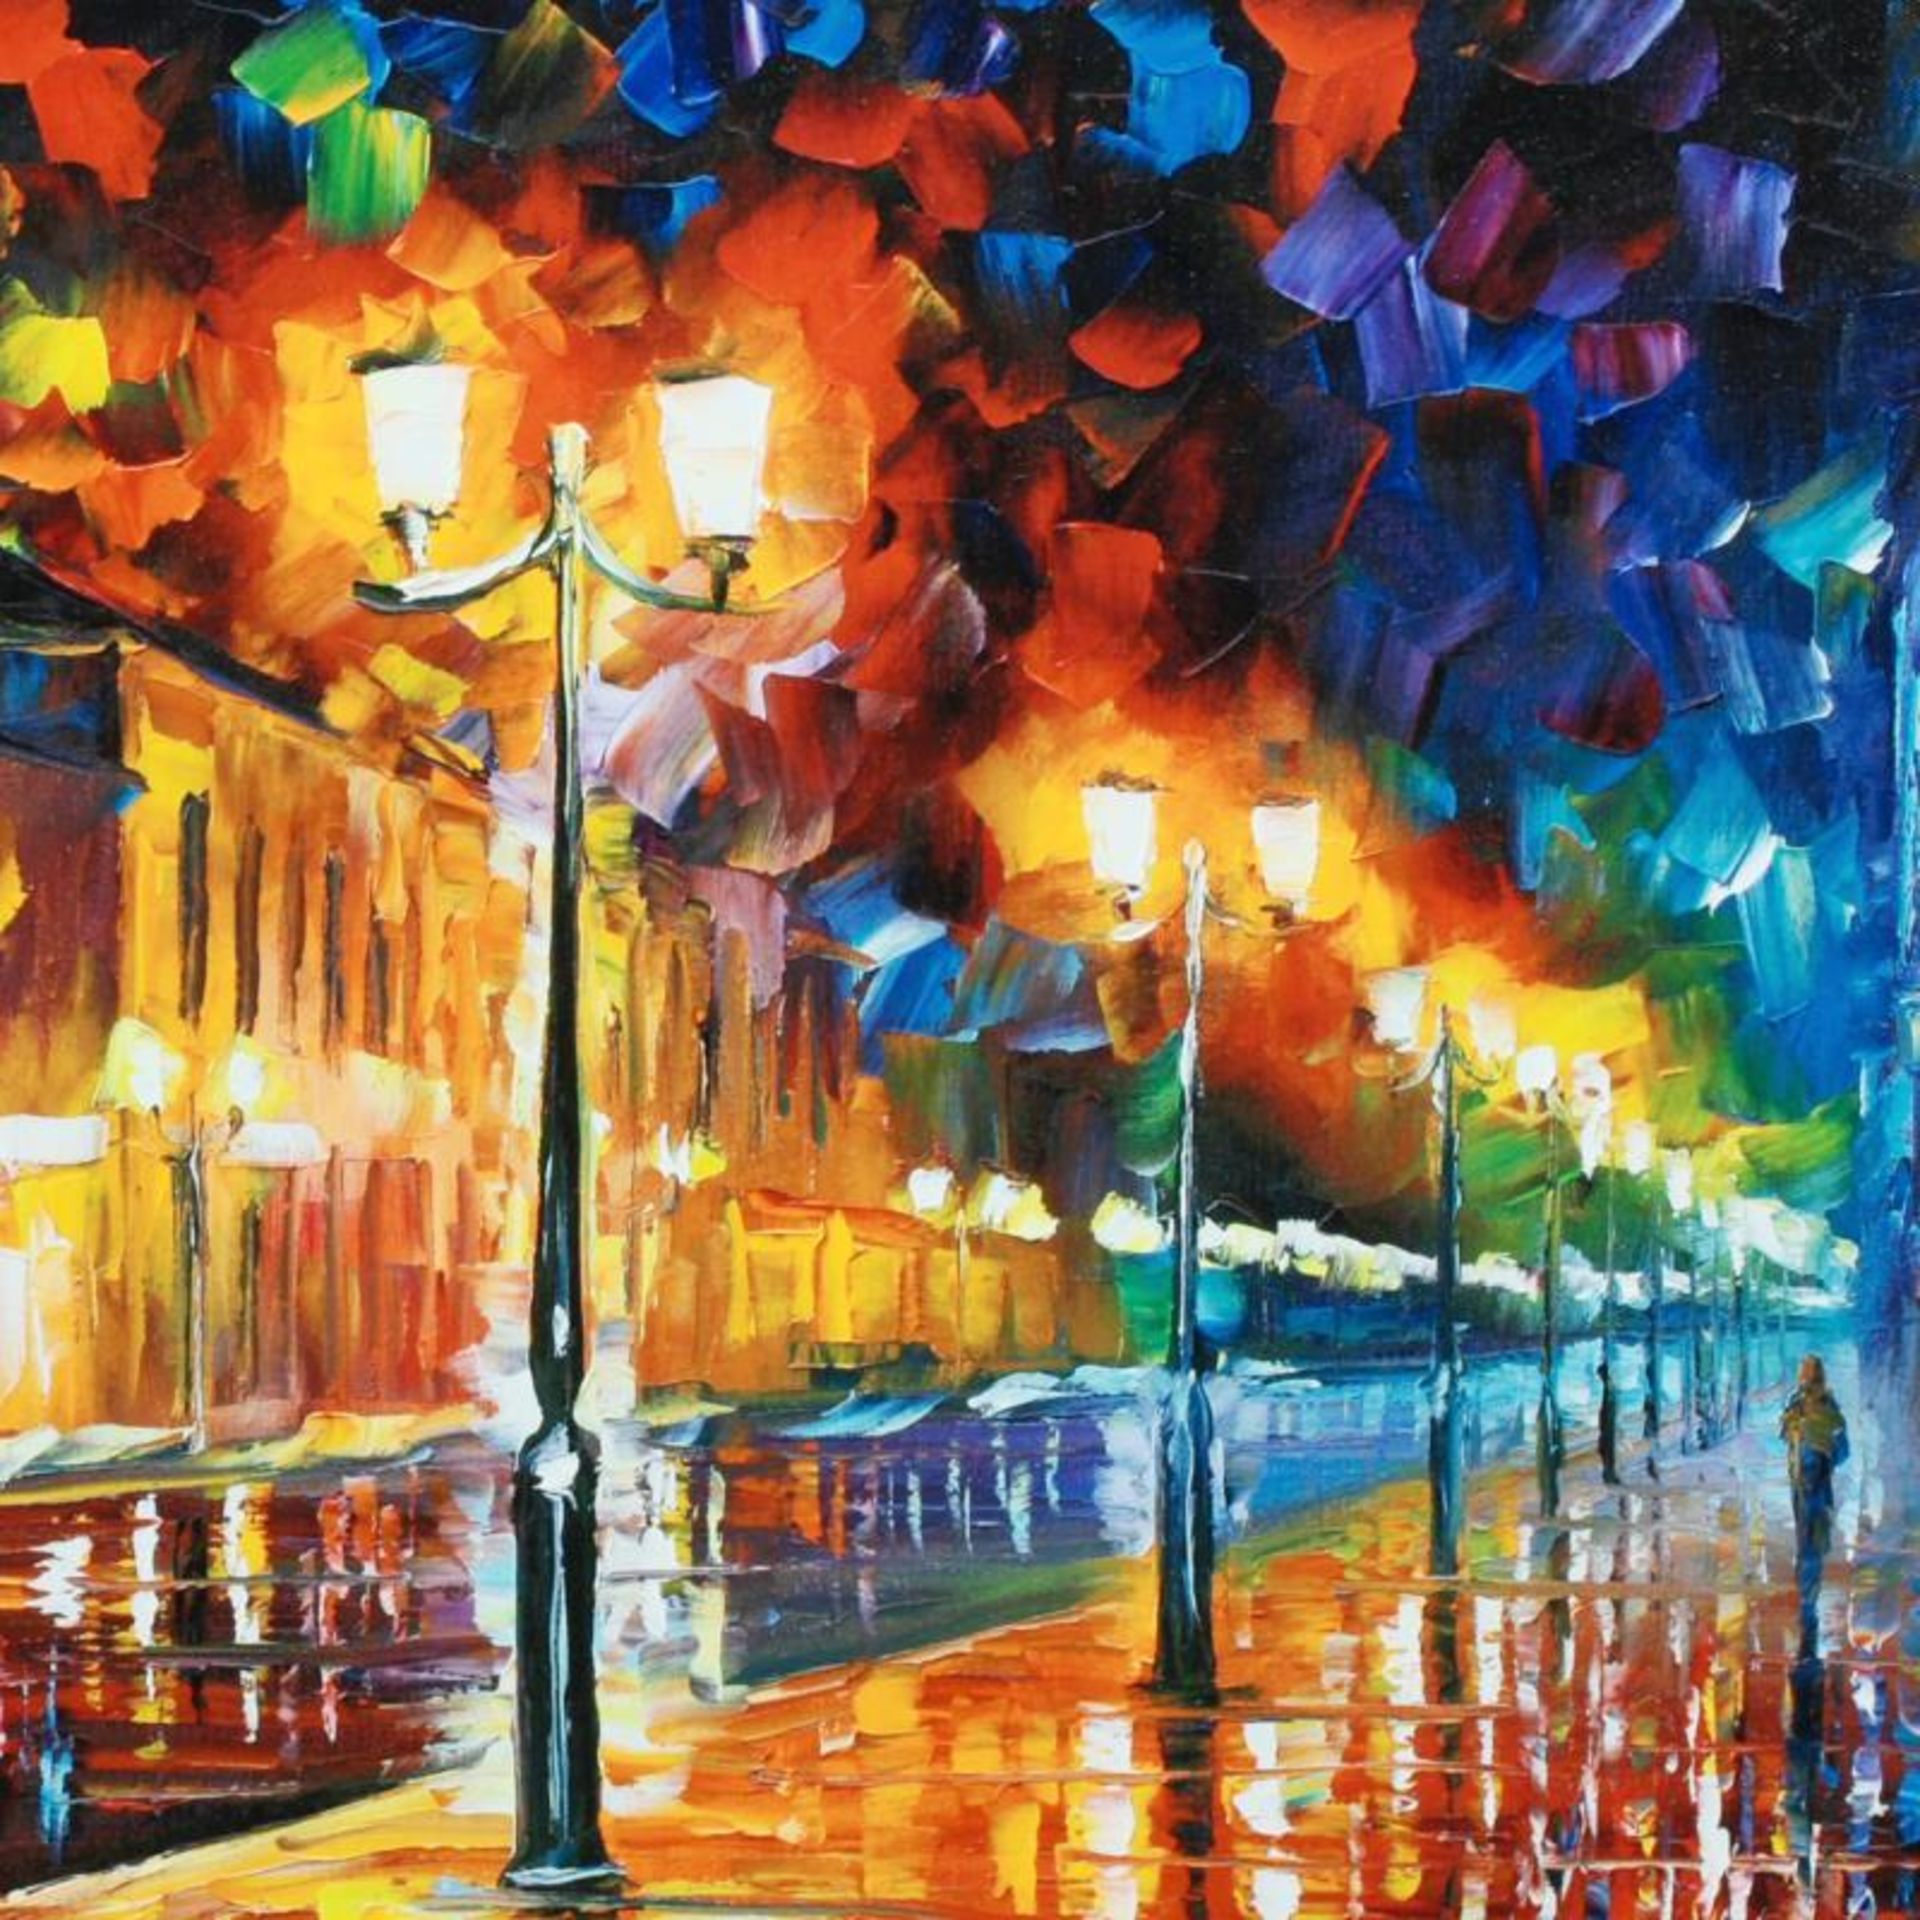 Leonid Afremov (1955-2019) "Infinity" Limited Edition Giclee on Canvas, Numbered - Image 2 of 3